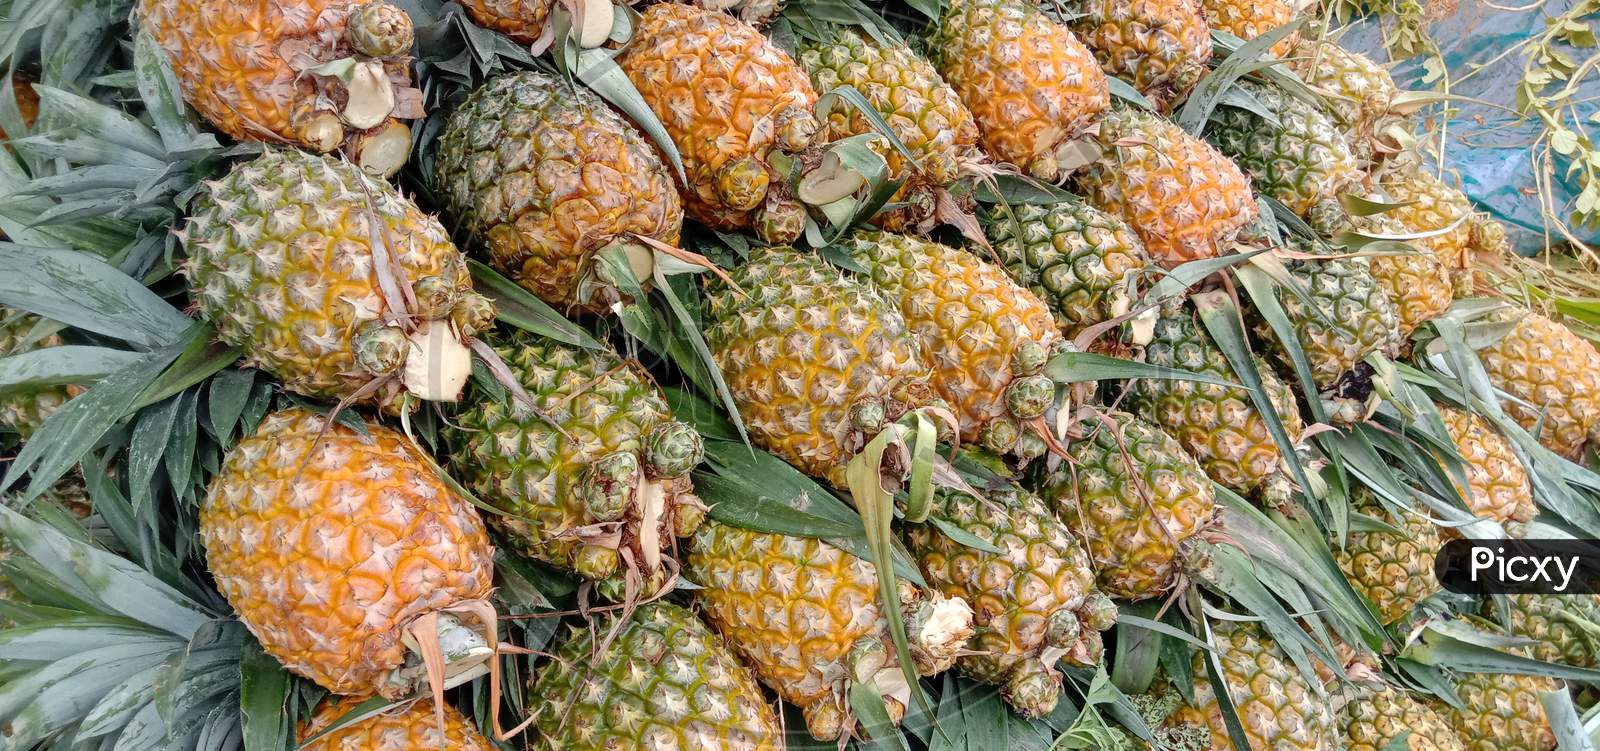 Healthy And Tasty Pineapple On Shop